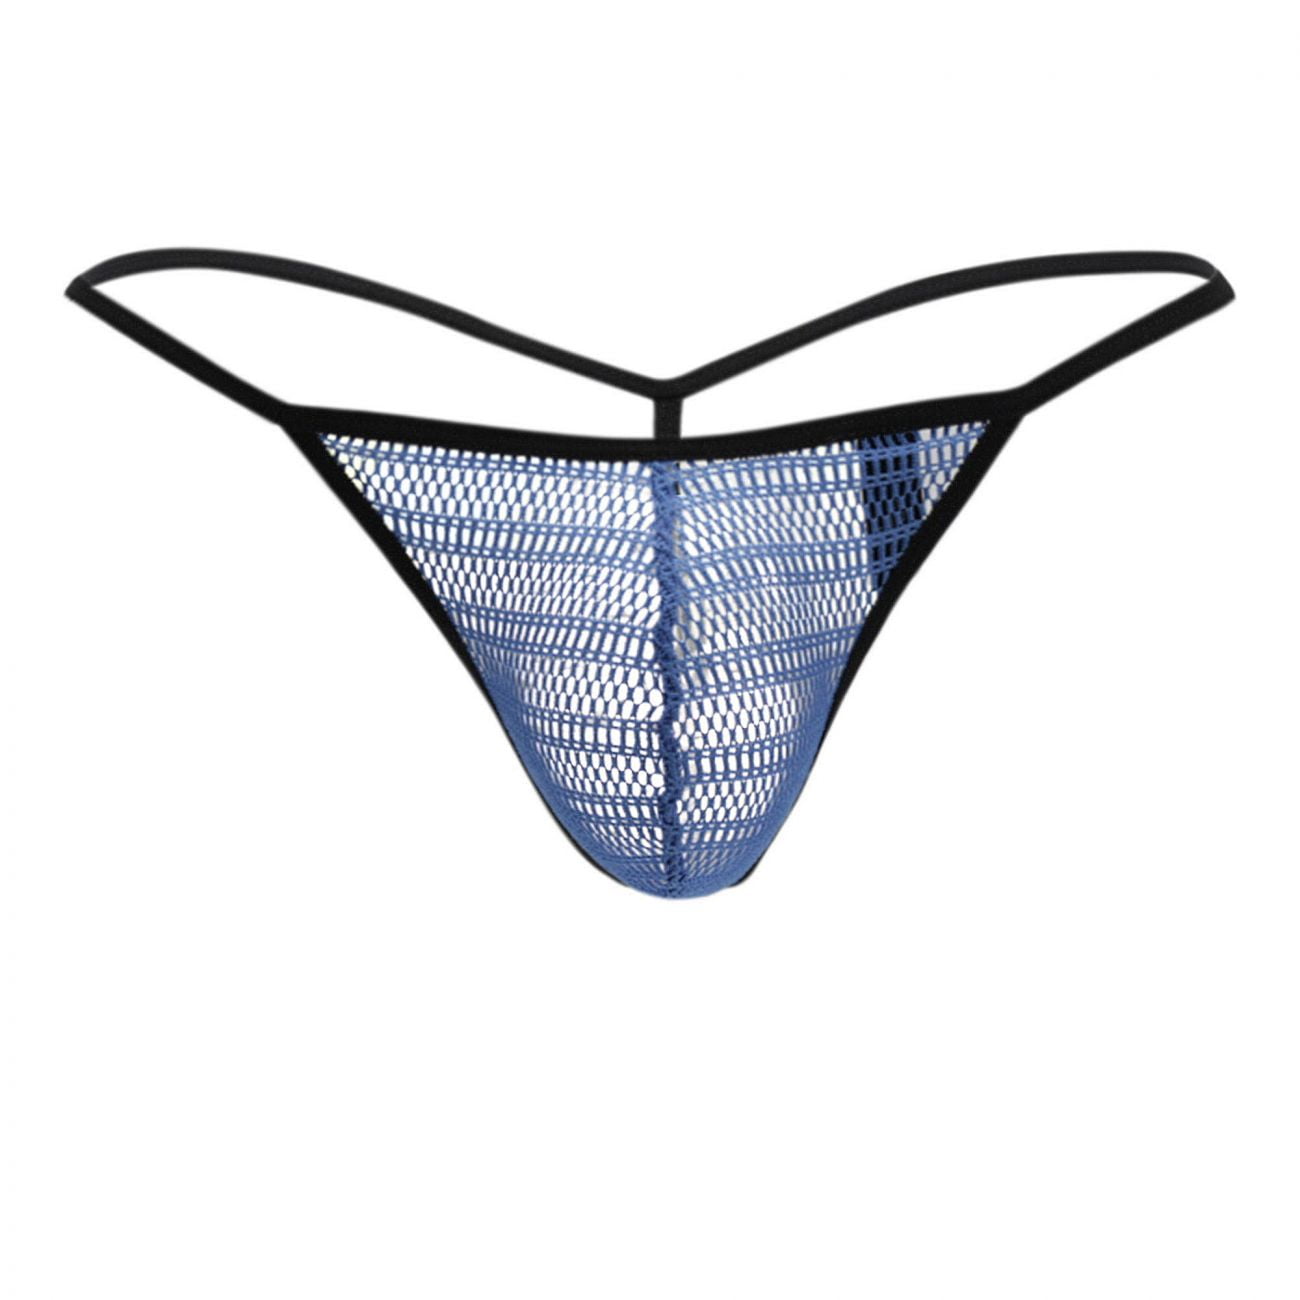 Review: Doreanse Aire Thong - The Bottom Drawer